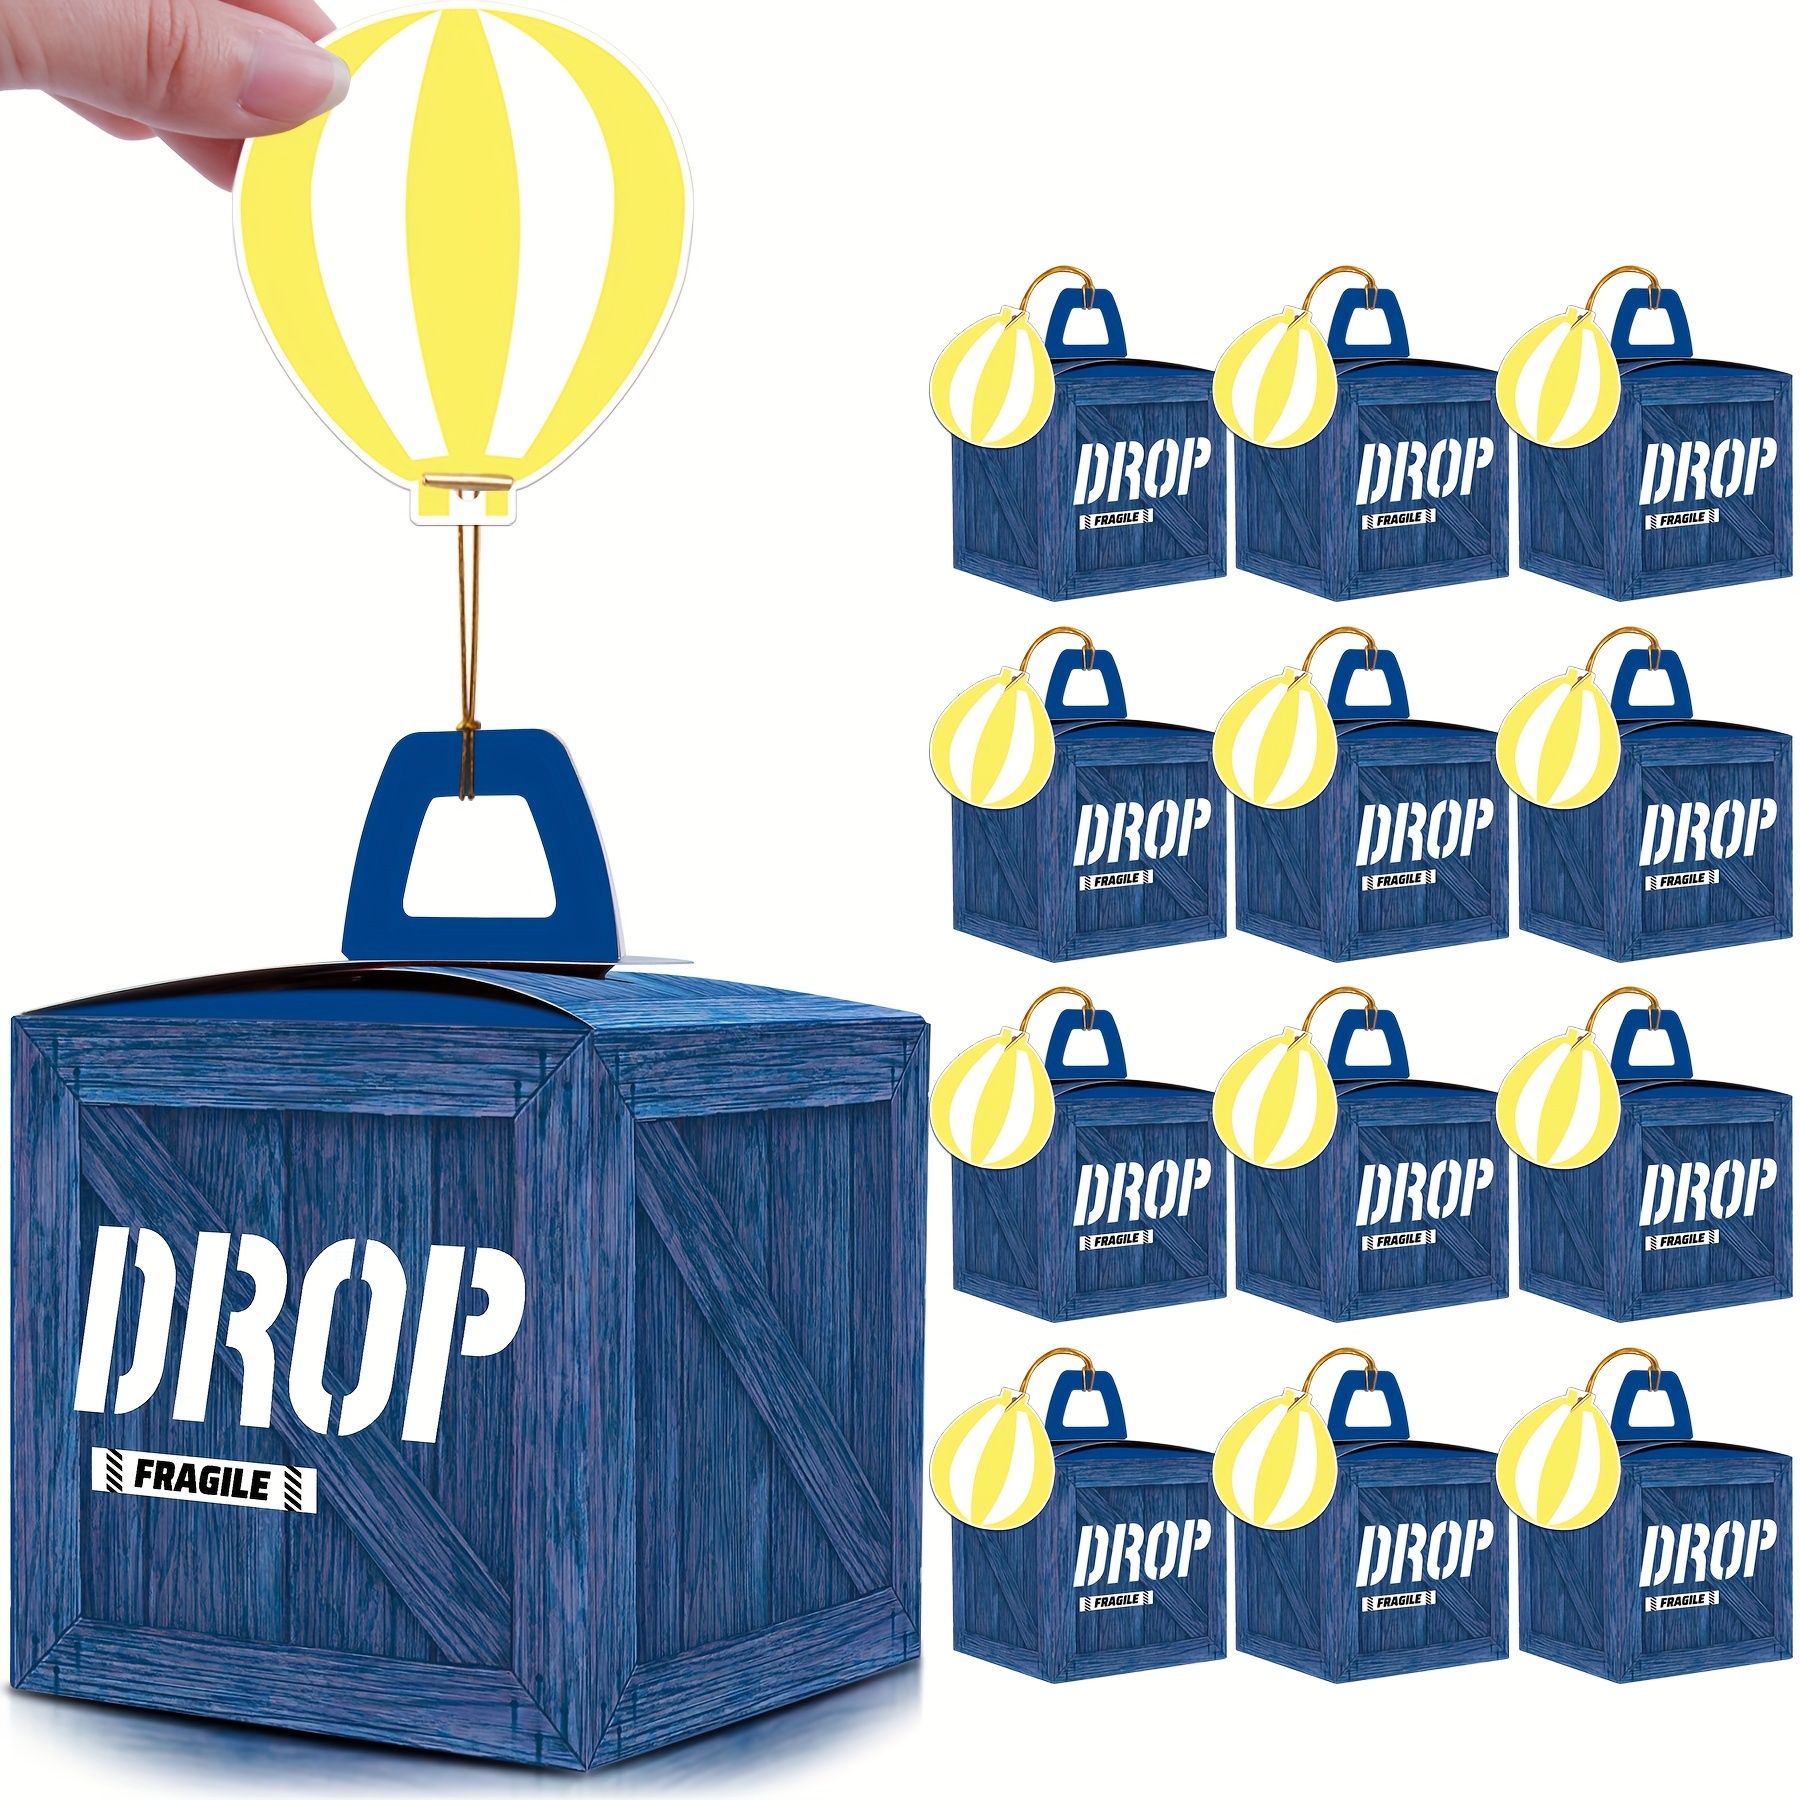 

12pcs/set, Game Military Supply Loot Drop Party Gift Boxes With Paper Balloon Card & Elastic String,blue Boxes Party Favor Boxes For Gaming Themed Birthday Party Decorations Supplies